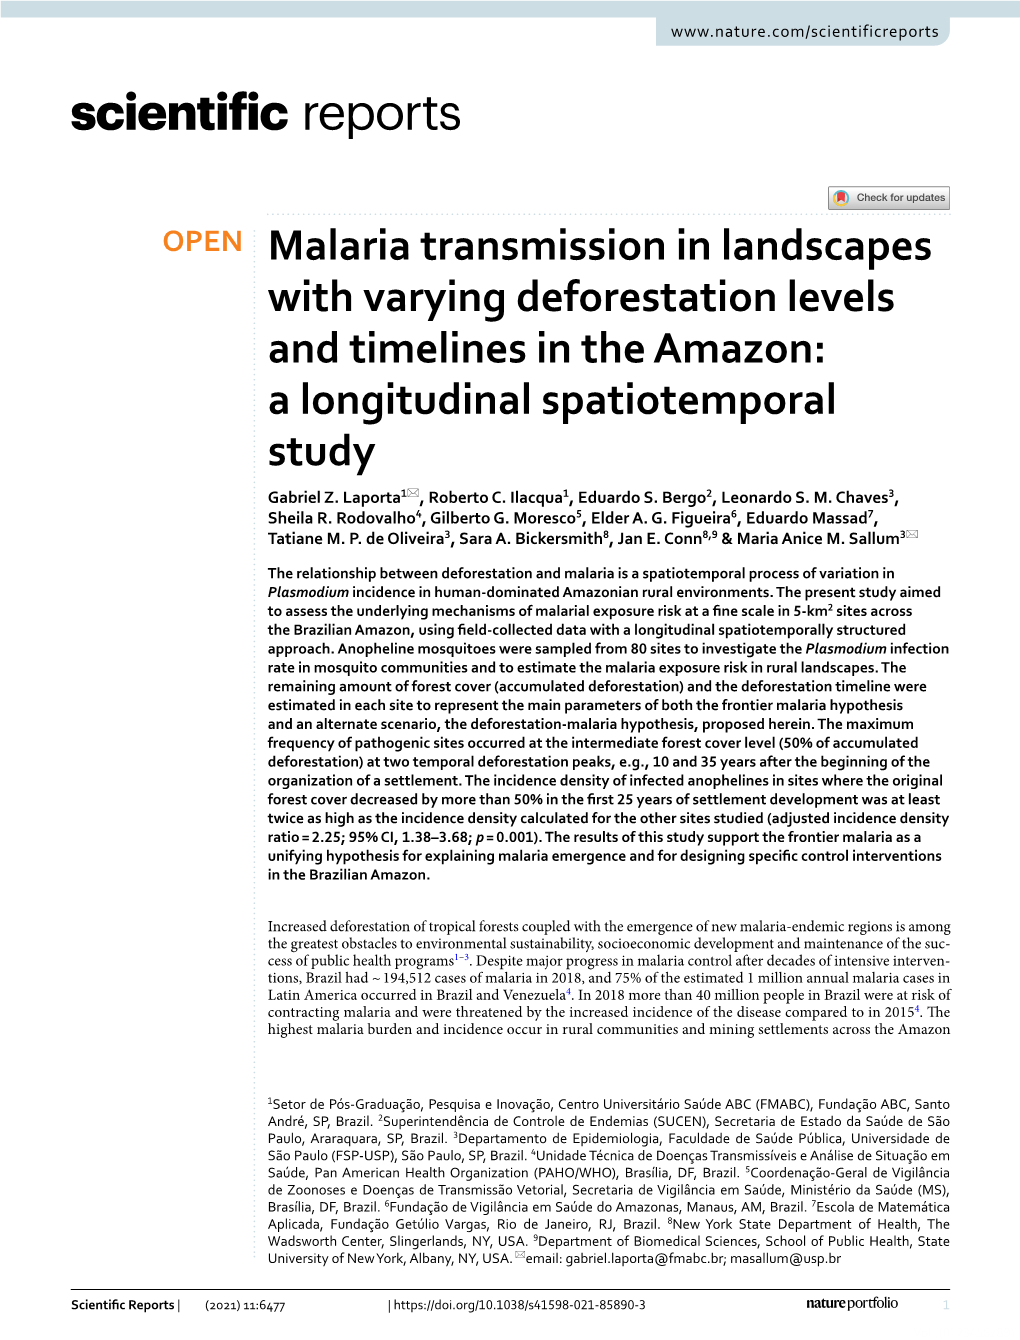 Malaria Transmission in Landscapes with Varying Deforestation Levels and Timelines in the Amazon: a Longitudinal Spatiotemporal Study Gabriel Z